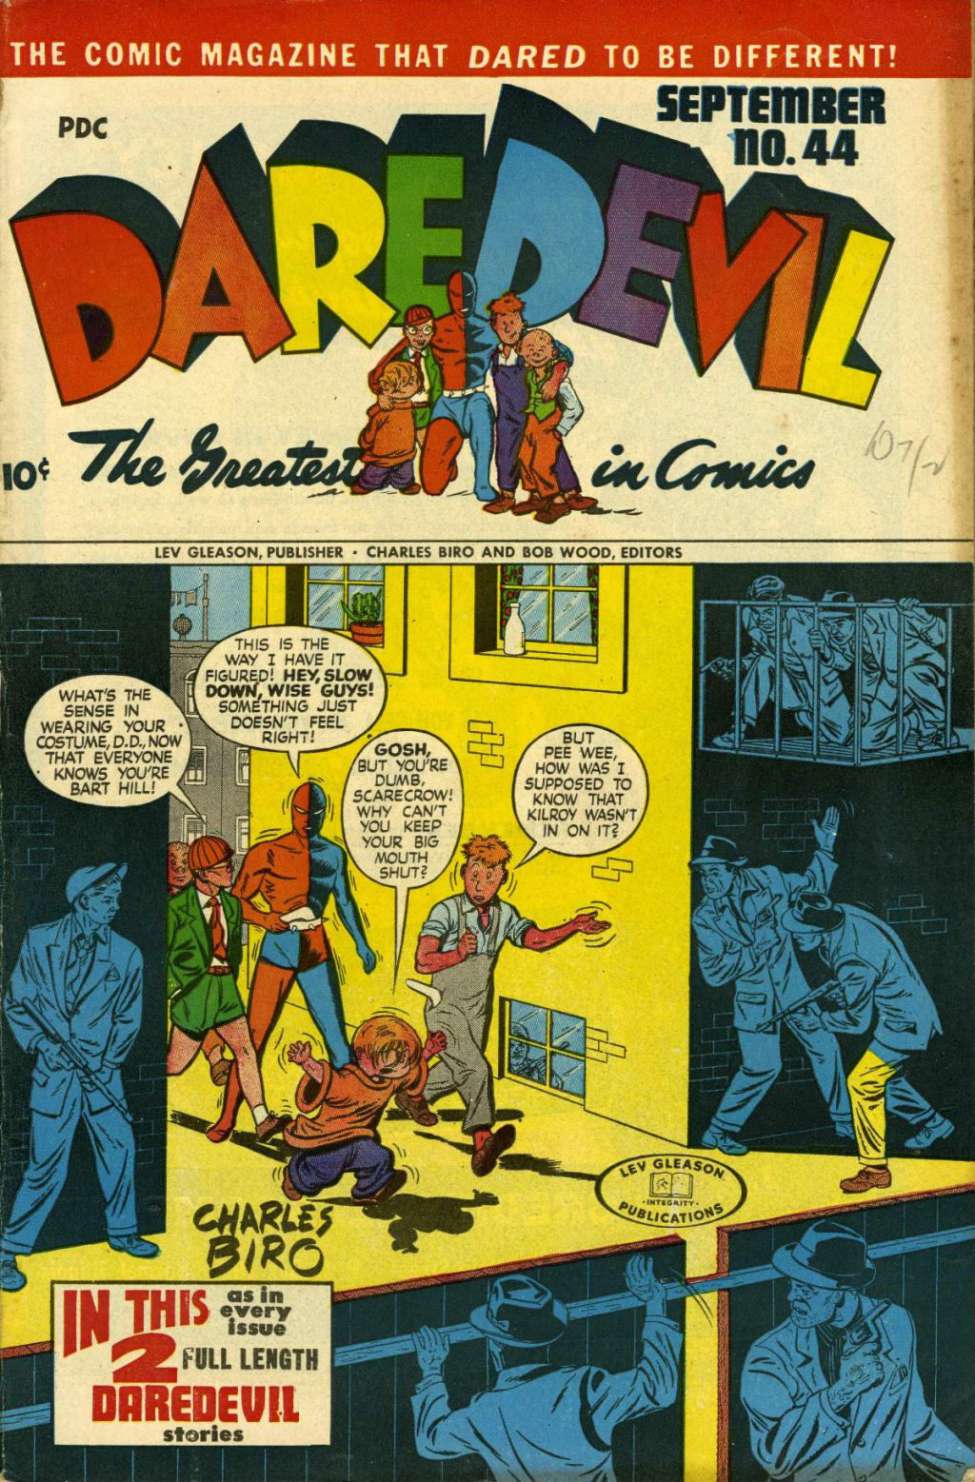 Book Cover For Daredevil - The Complete Archive Part 4